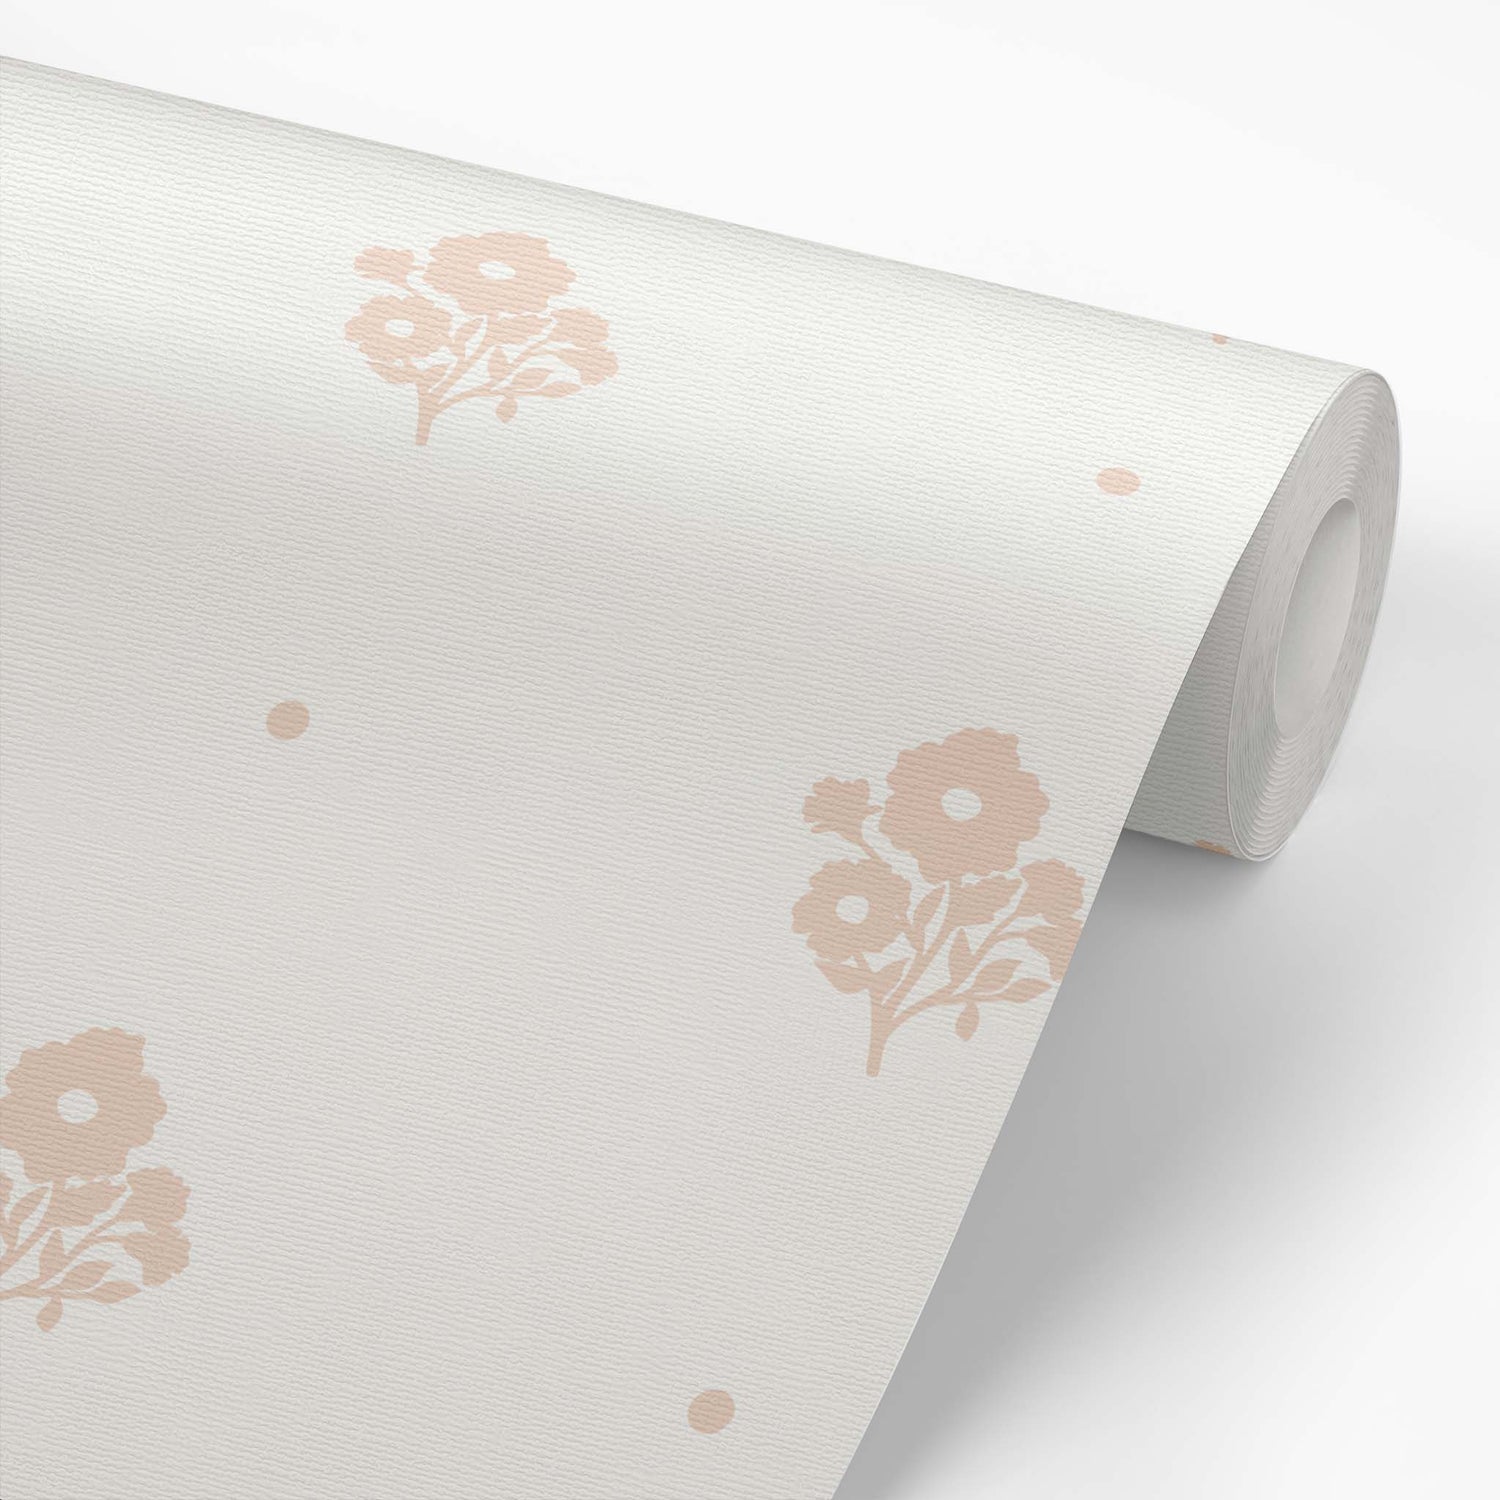 Elevate your home decor with our Cambridge Wallpaper in a sophisticated peach shown on a wallpaper roll.